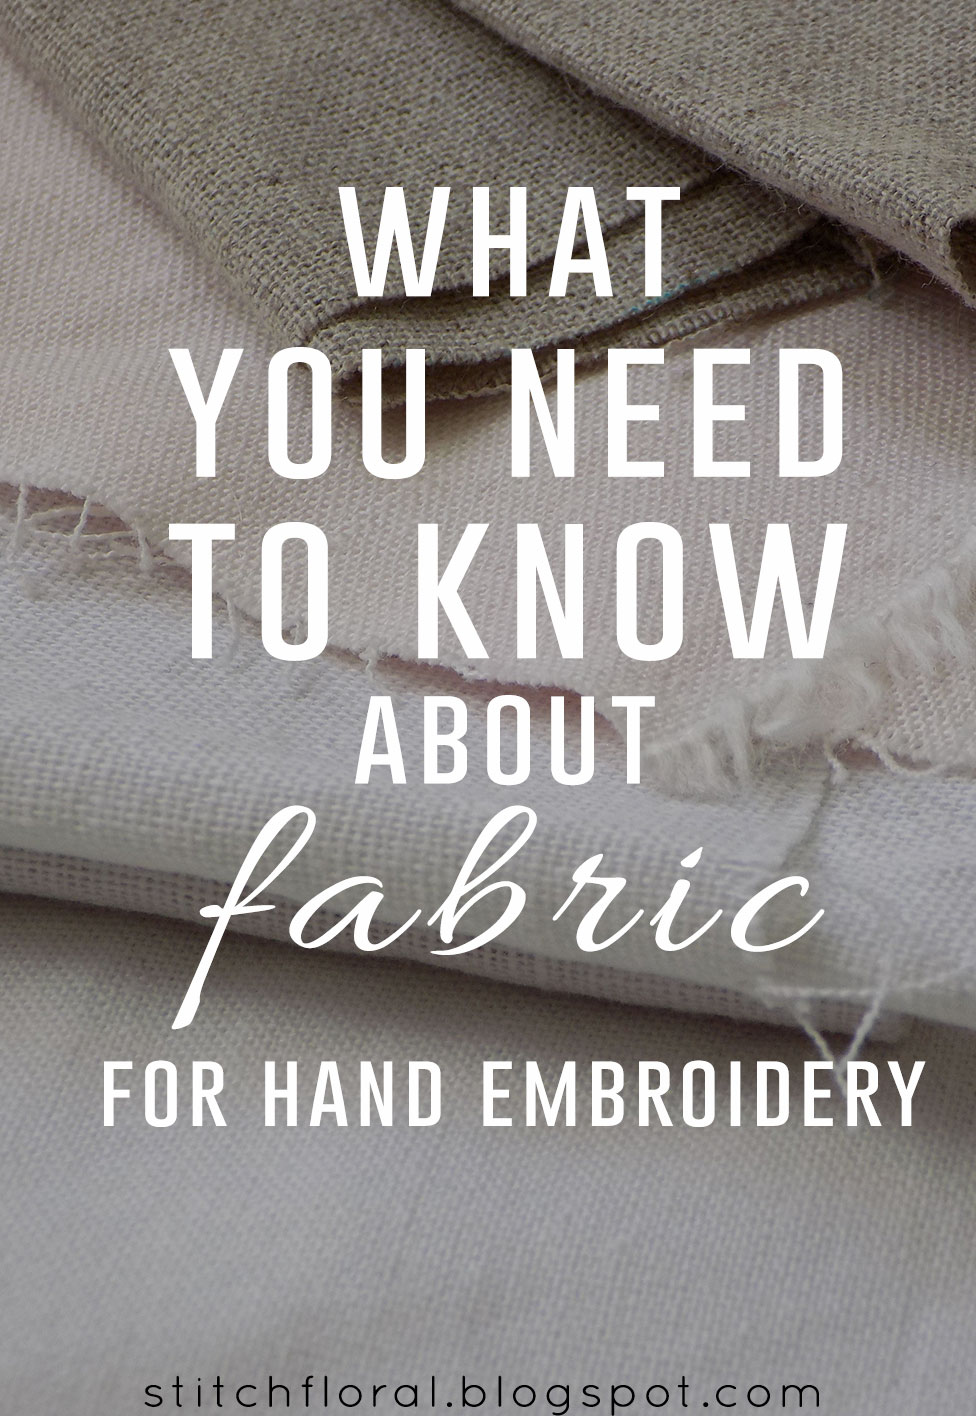 6 Great Fabrics (Plus Other Materials) to Use for Hand Embroidery